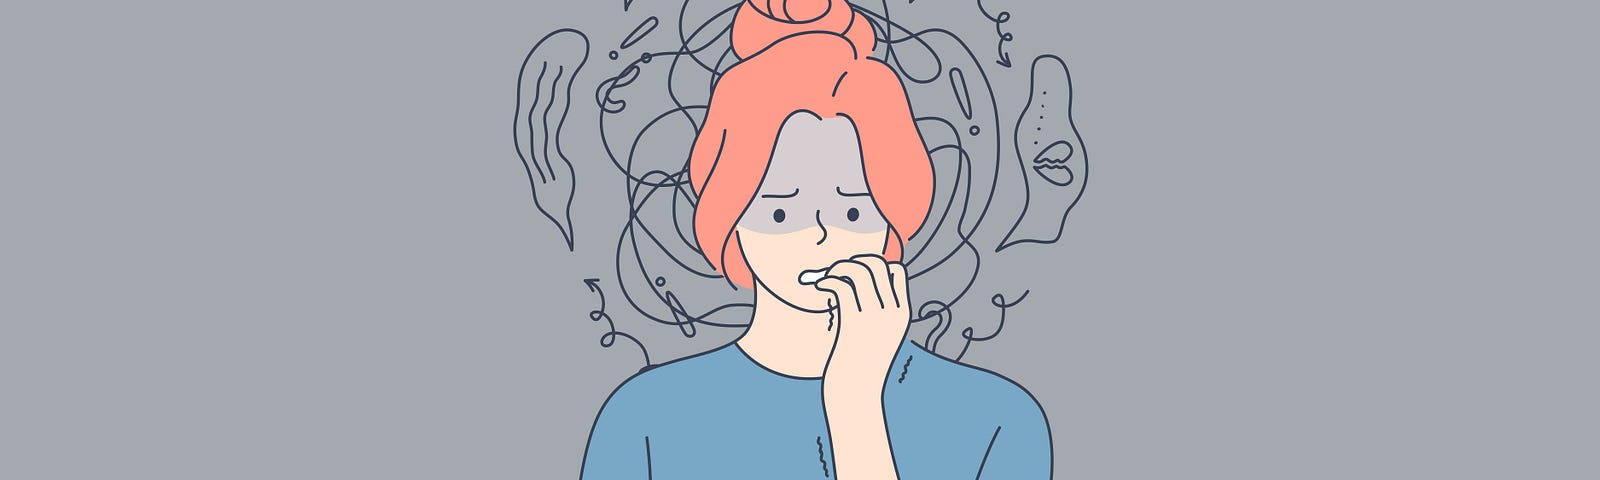 Illustration of woman with swirling anxious thoughts around her.